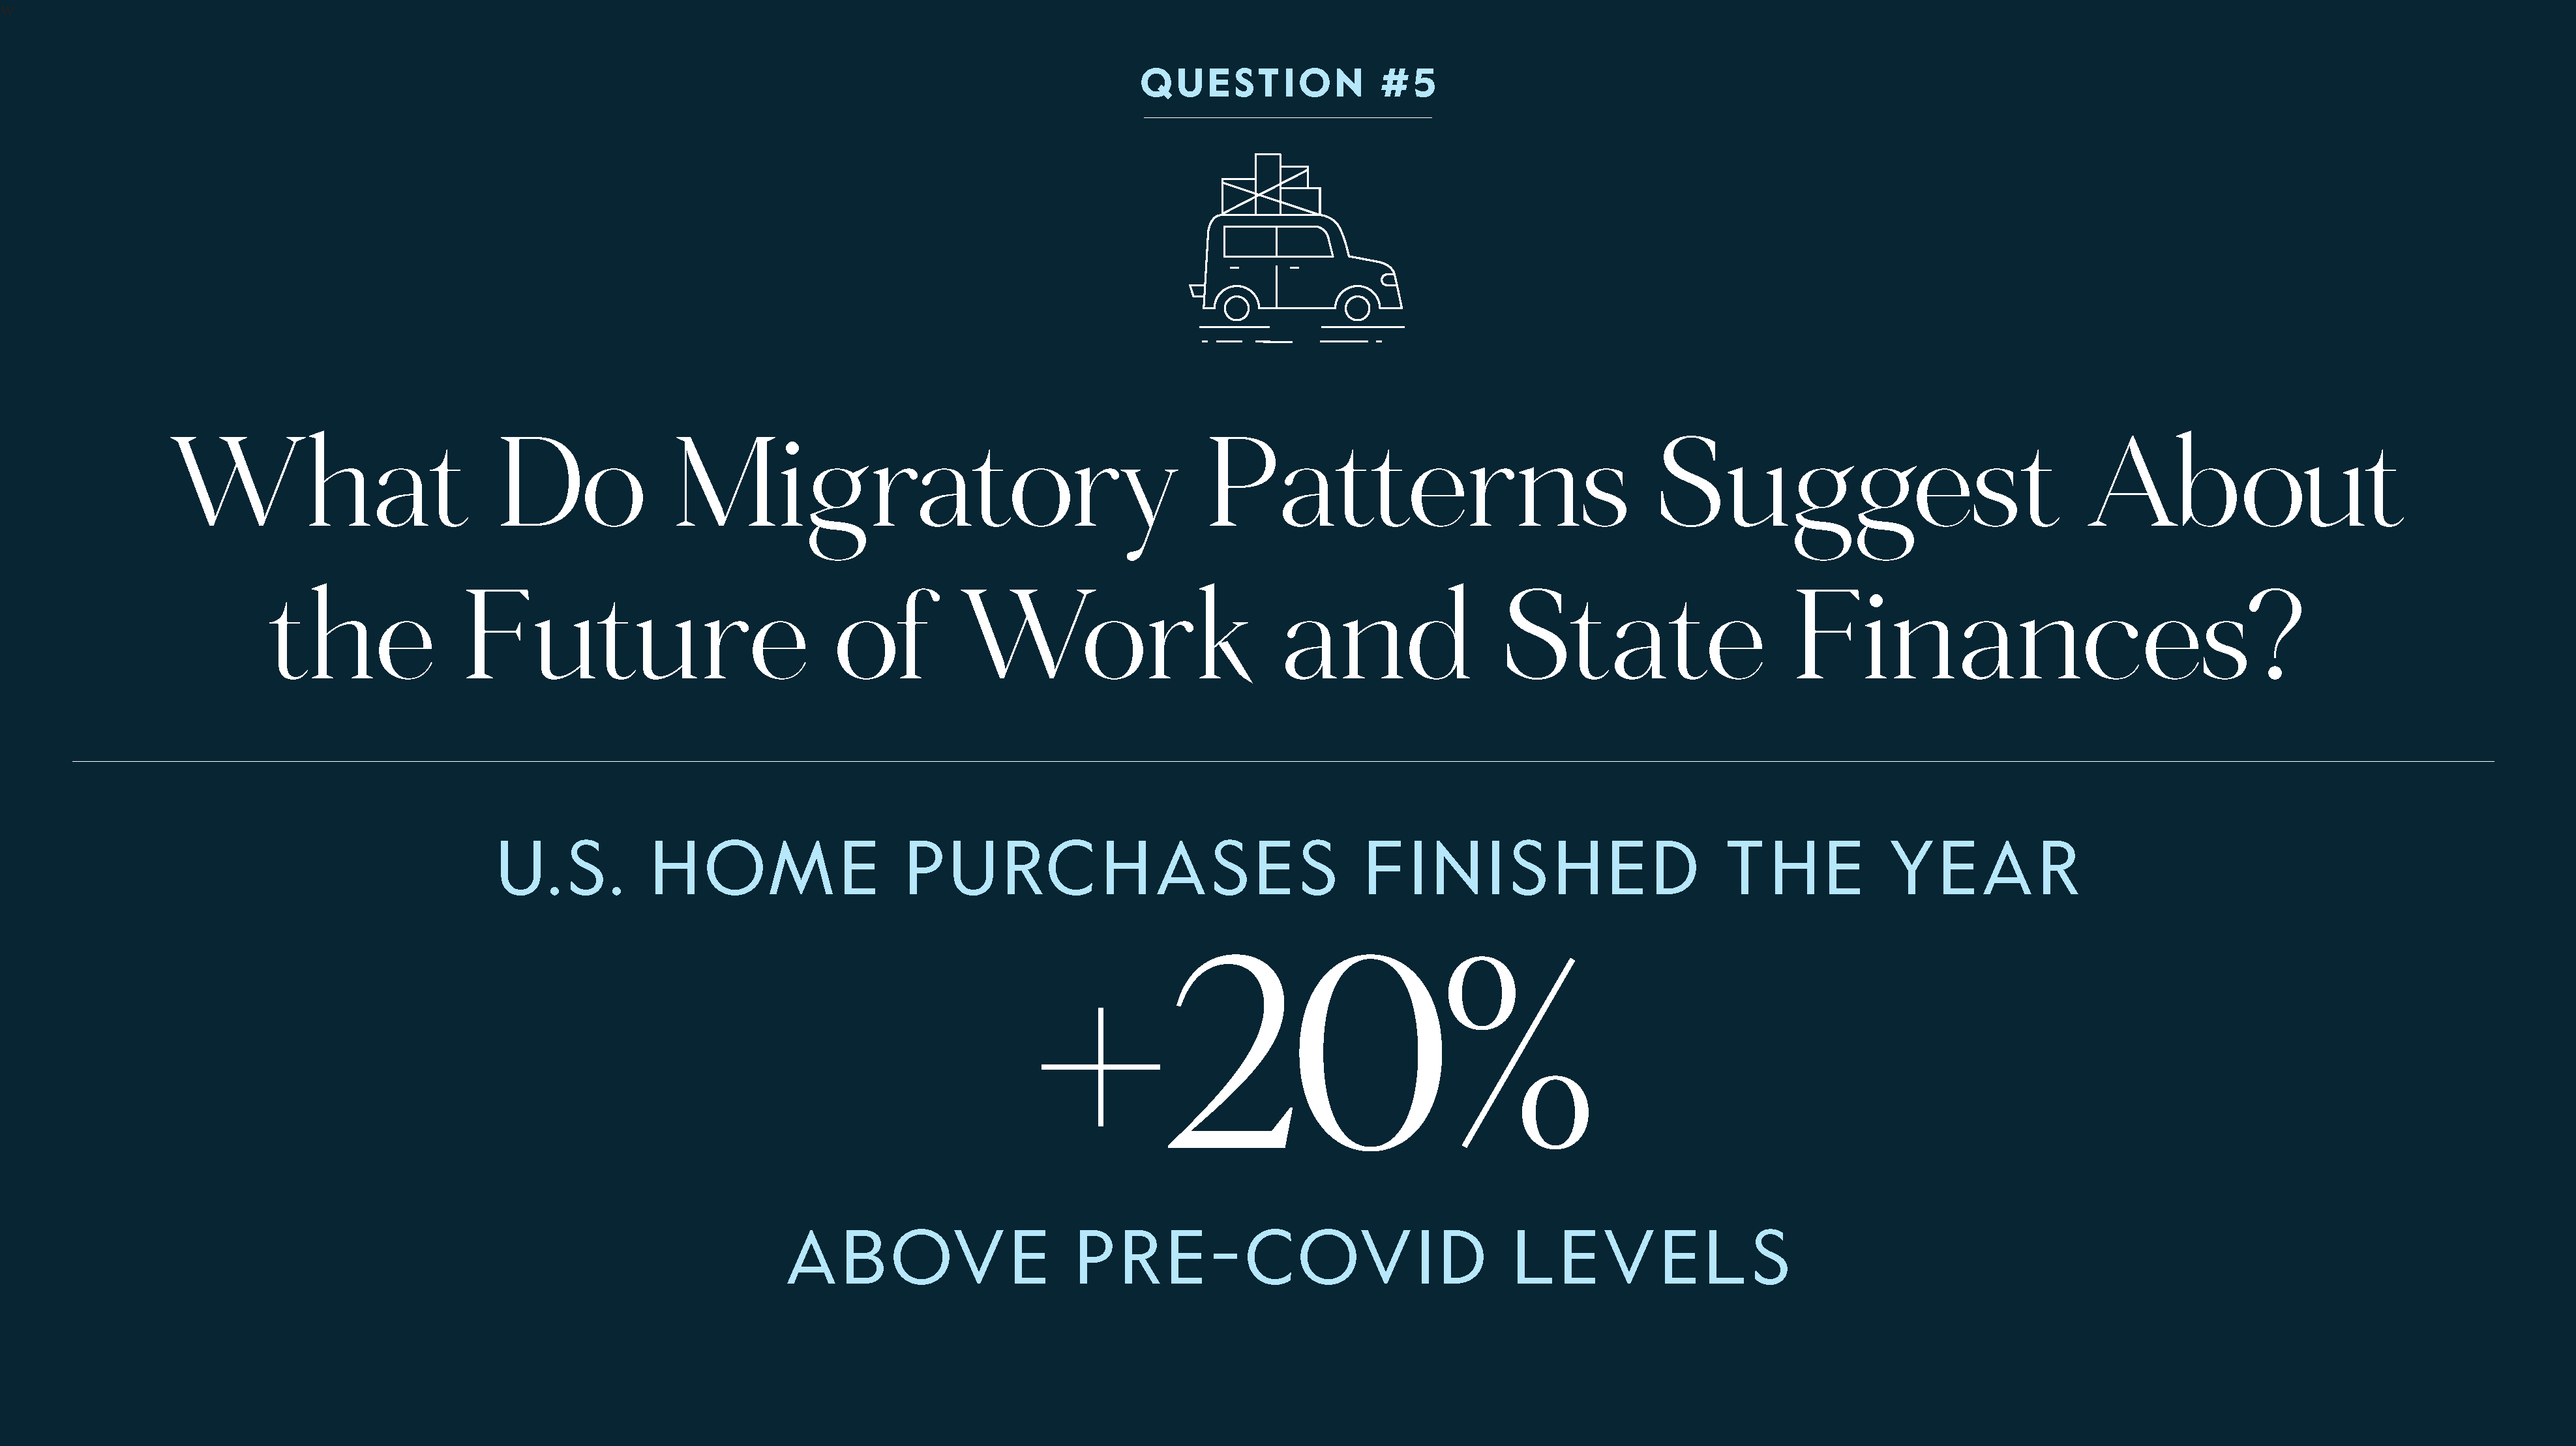 What do migratory patterns suggest about the future of work and state finances?